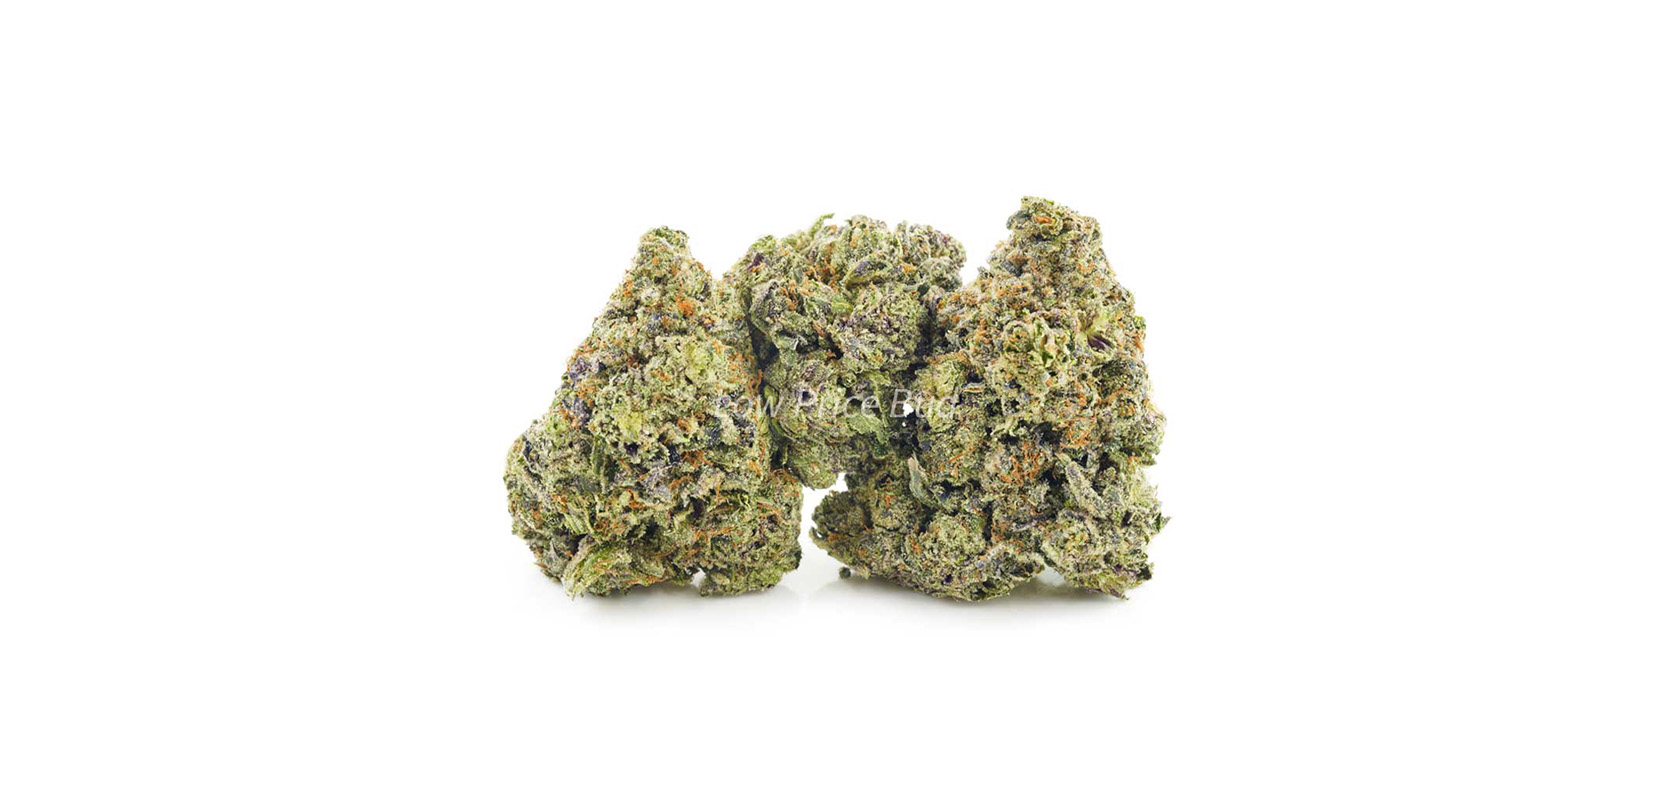 Cheapweed buds Holy Grail strain weed online Canada at Low Price Bud dispensary for mail order marijuana. weed shop. budmail. buy weed online canada. gummys and vape pens.